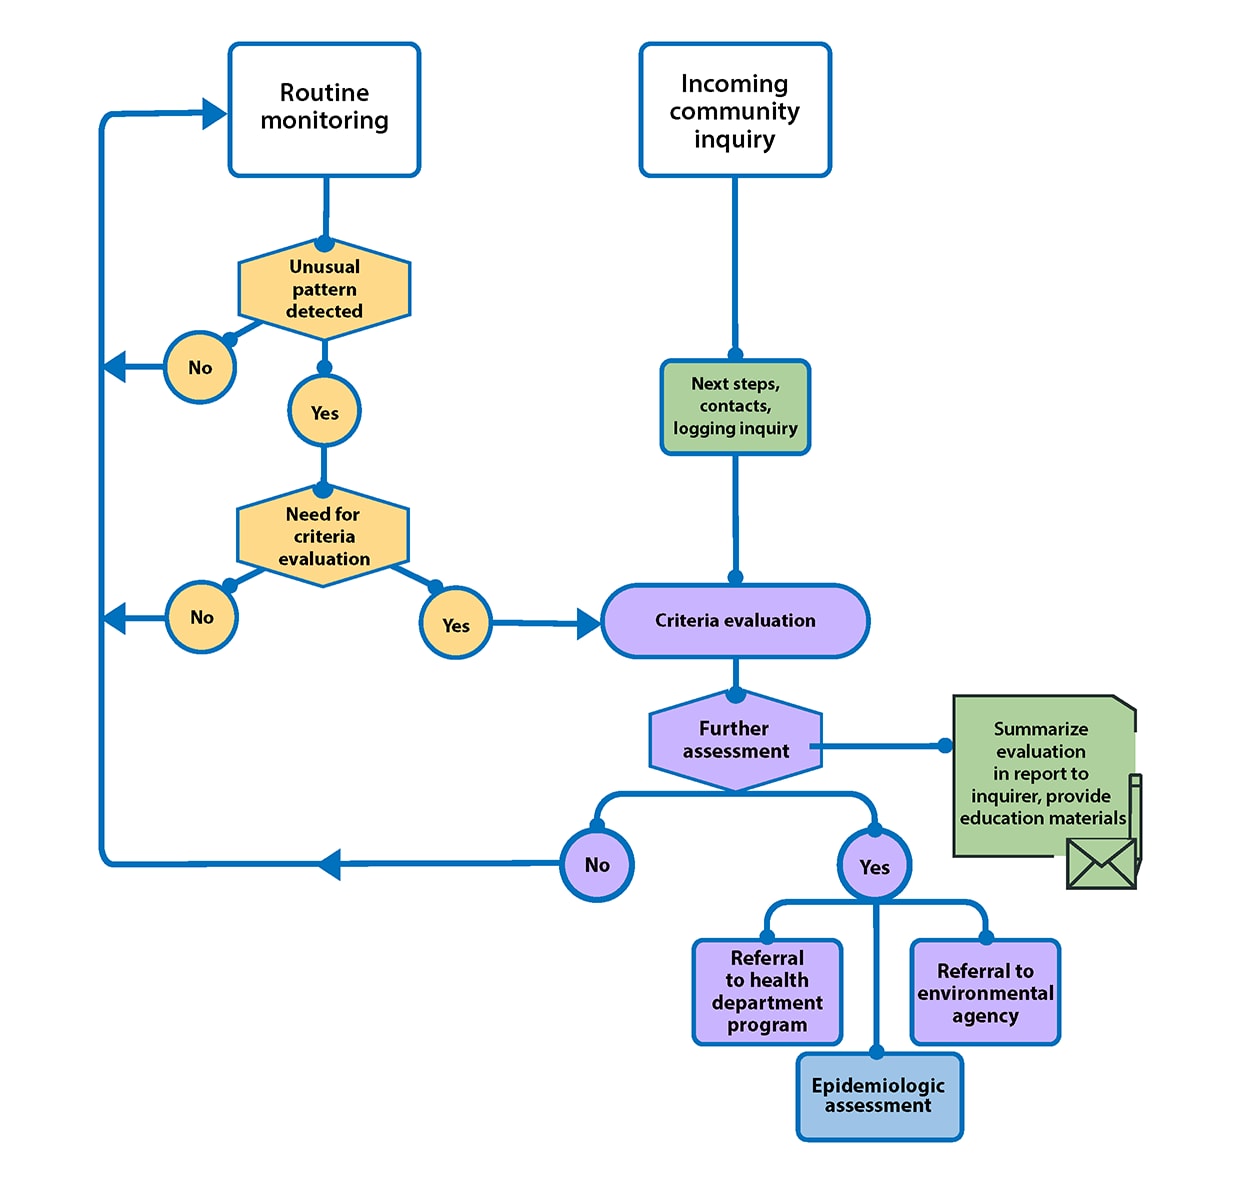 A flowchart of the revised guidelines process for evaluating patterns of cancer. The chart starts with "routine monitoring" and "incoming community inquiry" and flows down to different outcomes based on yes or no determinations.